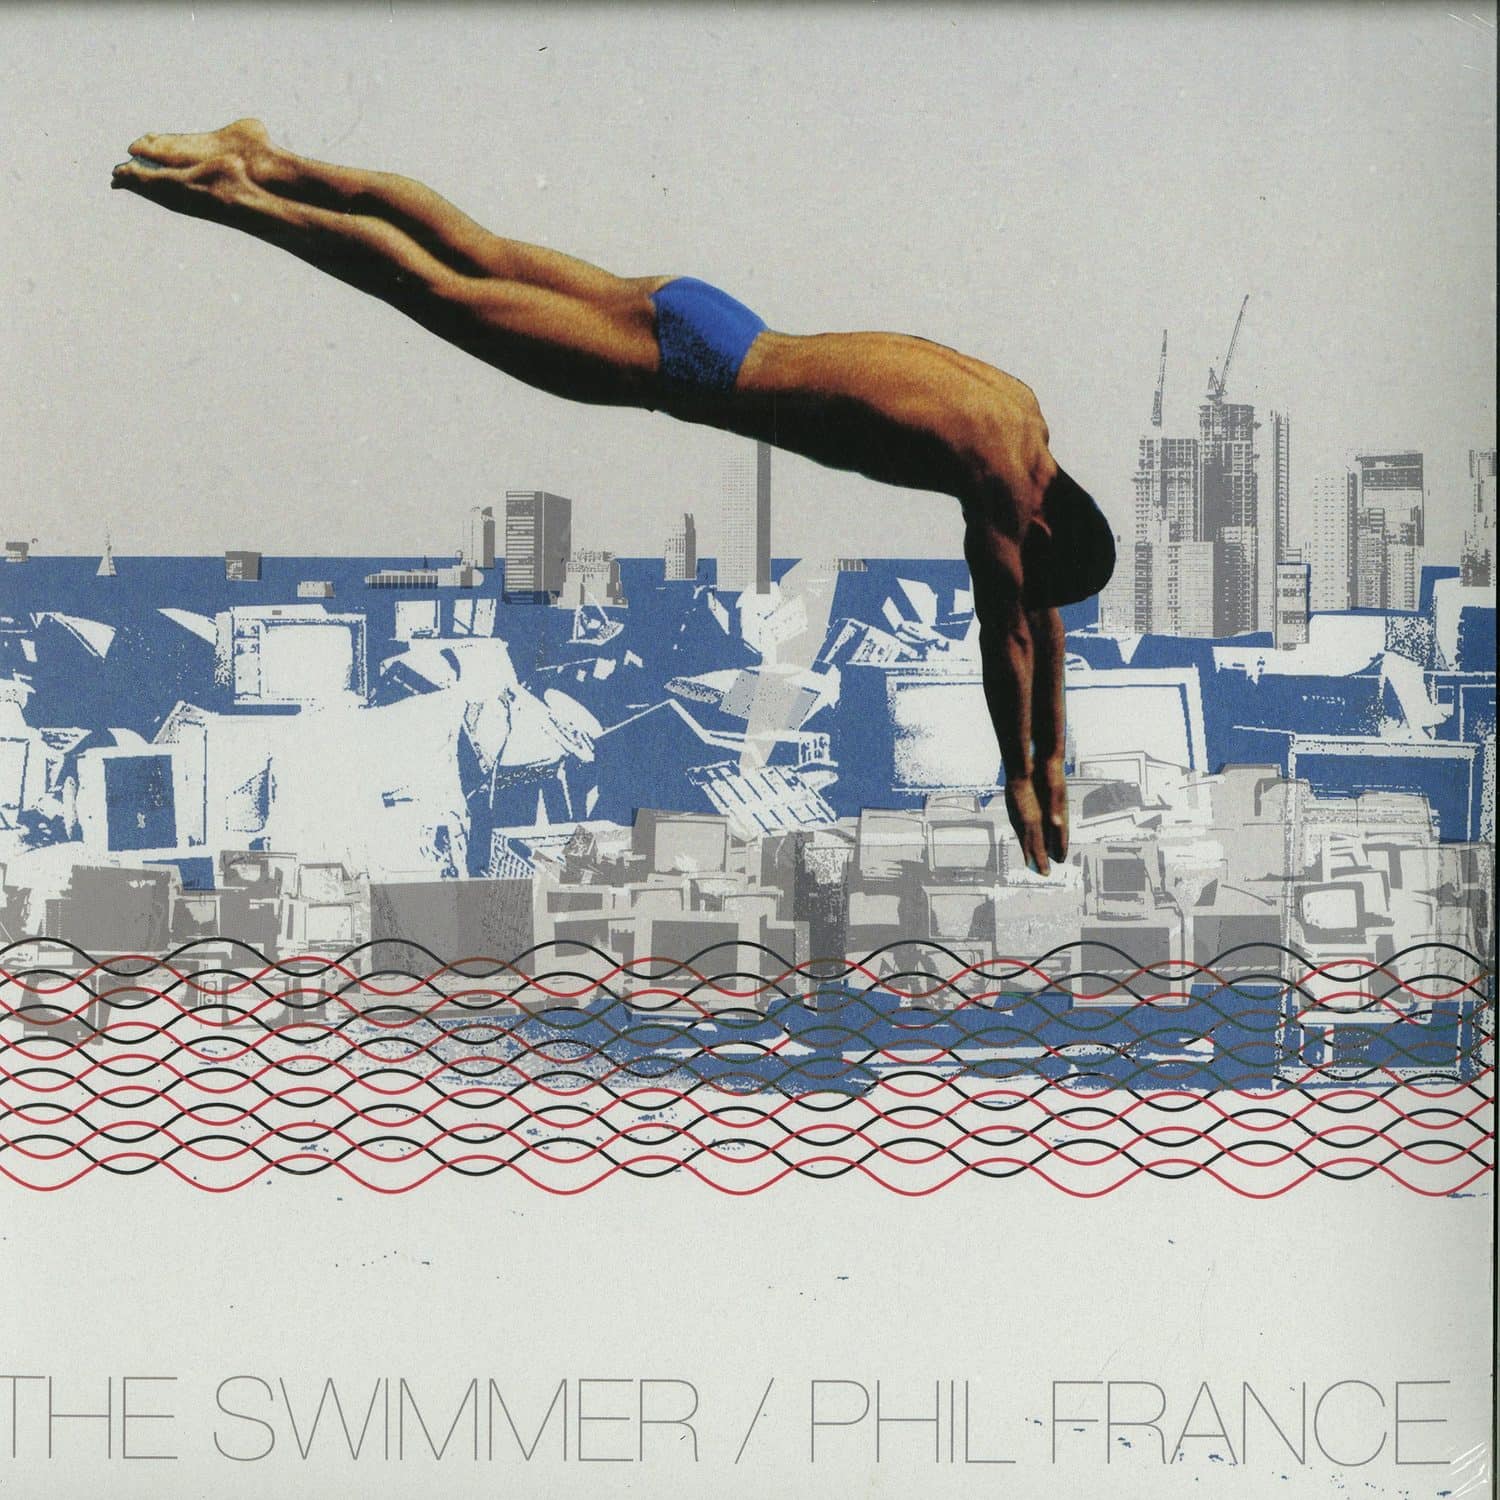 Phil France - THE SWIMMER 